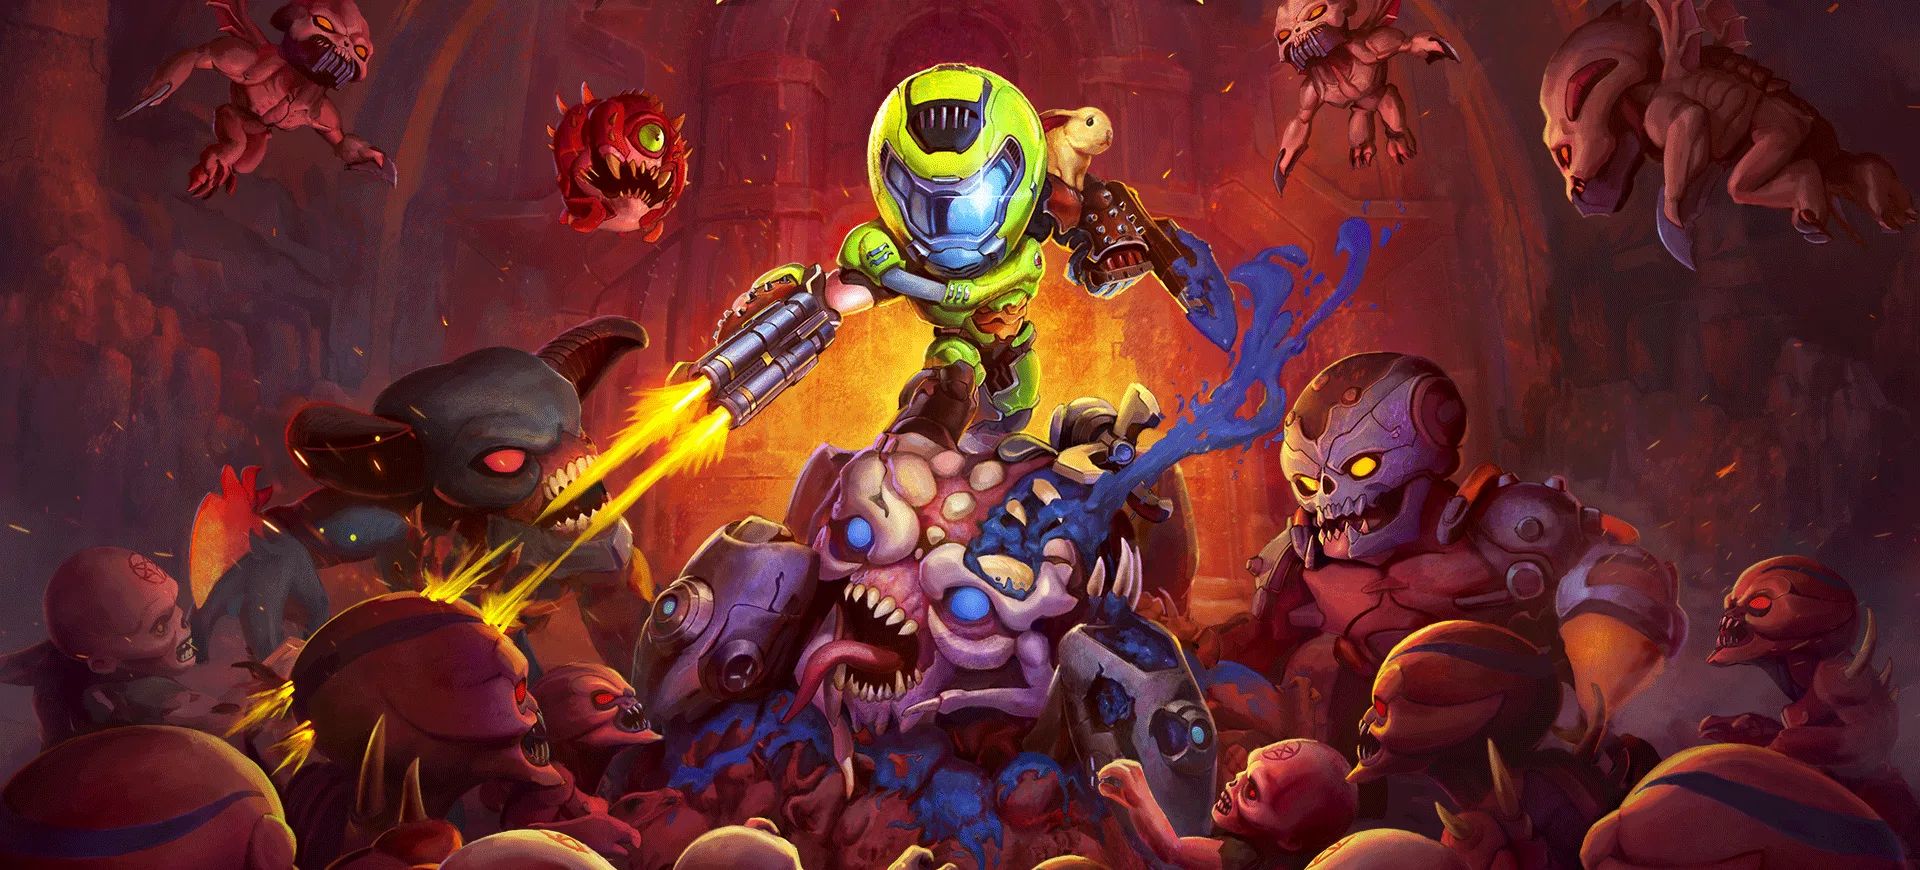 Image for Mighty Doom is a new top-down arcade shooter coming to iOS and Android